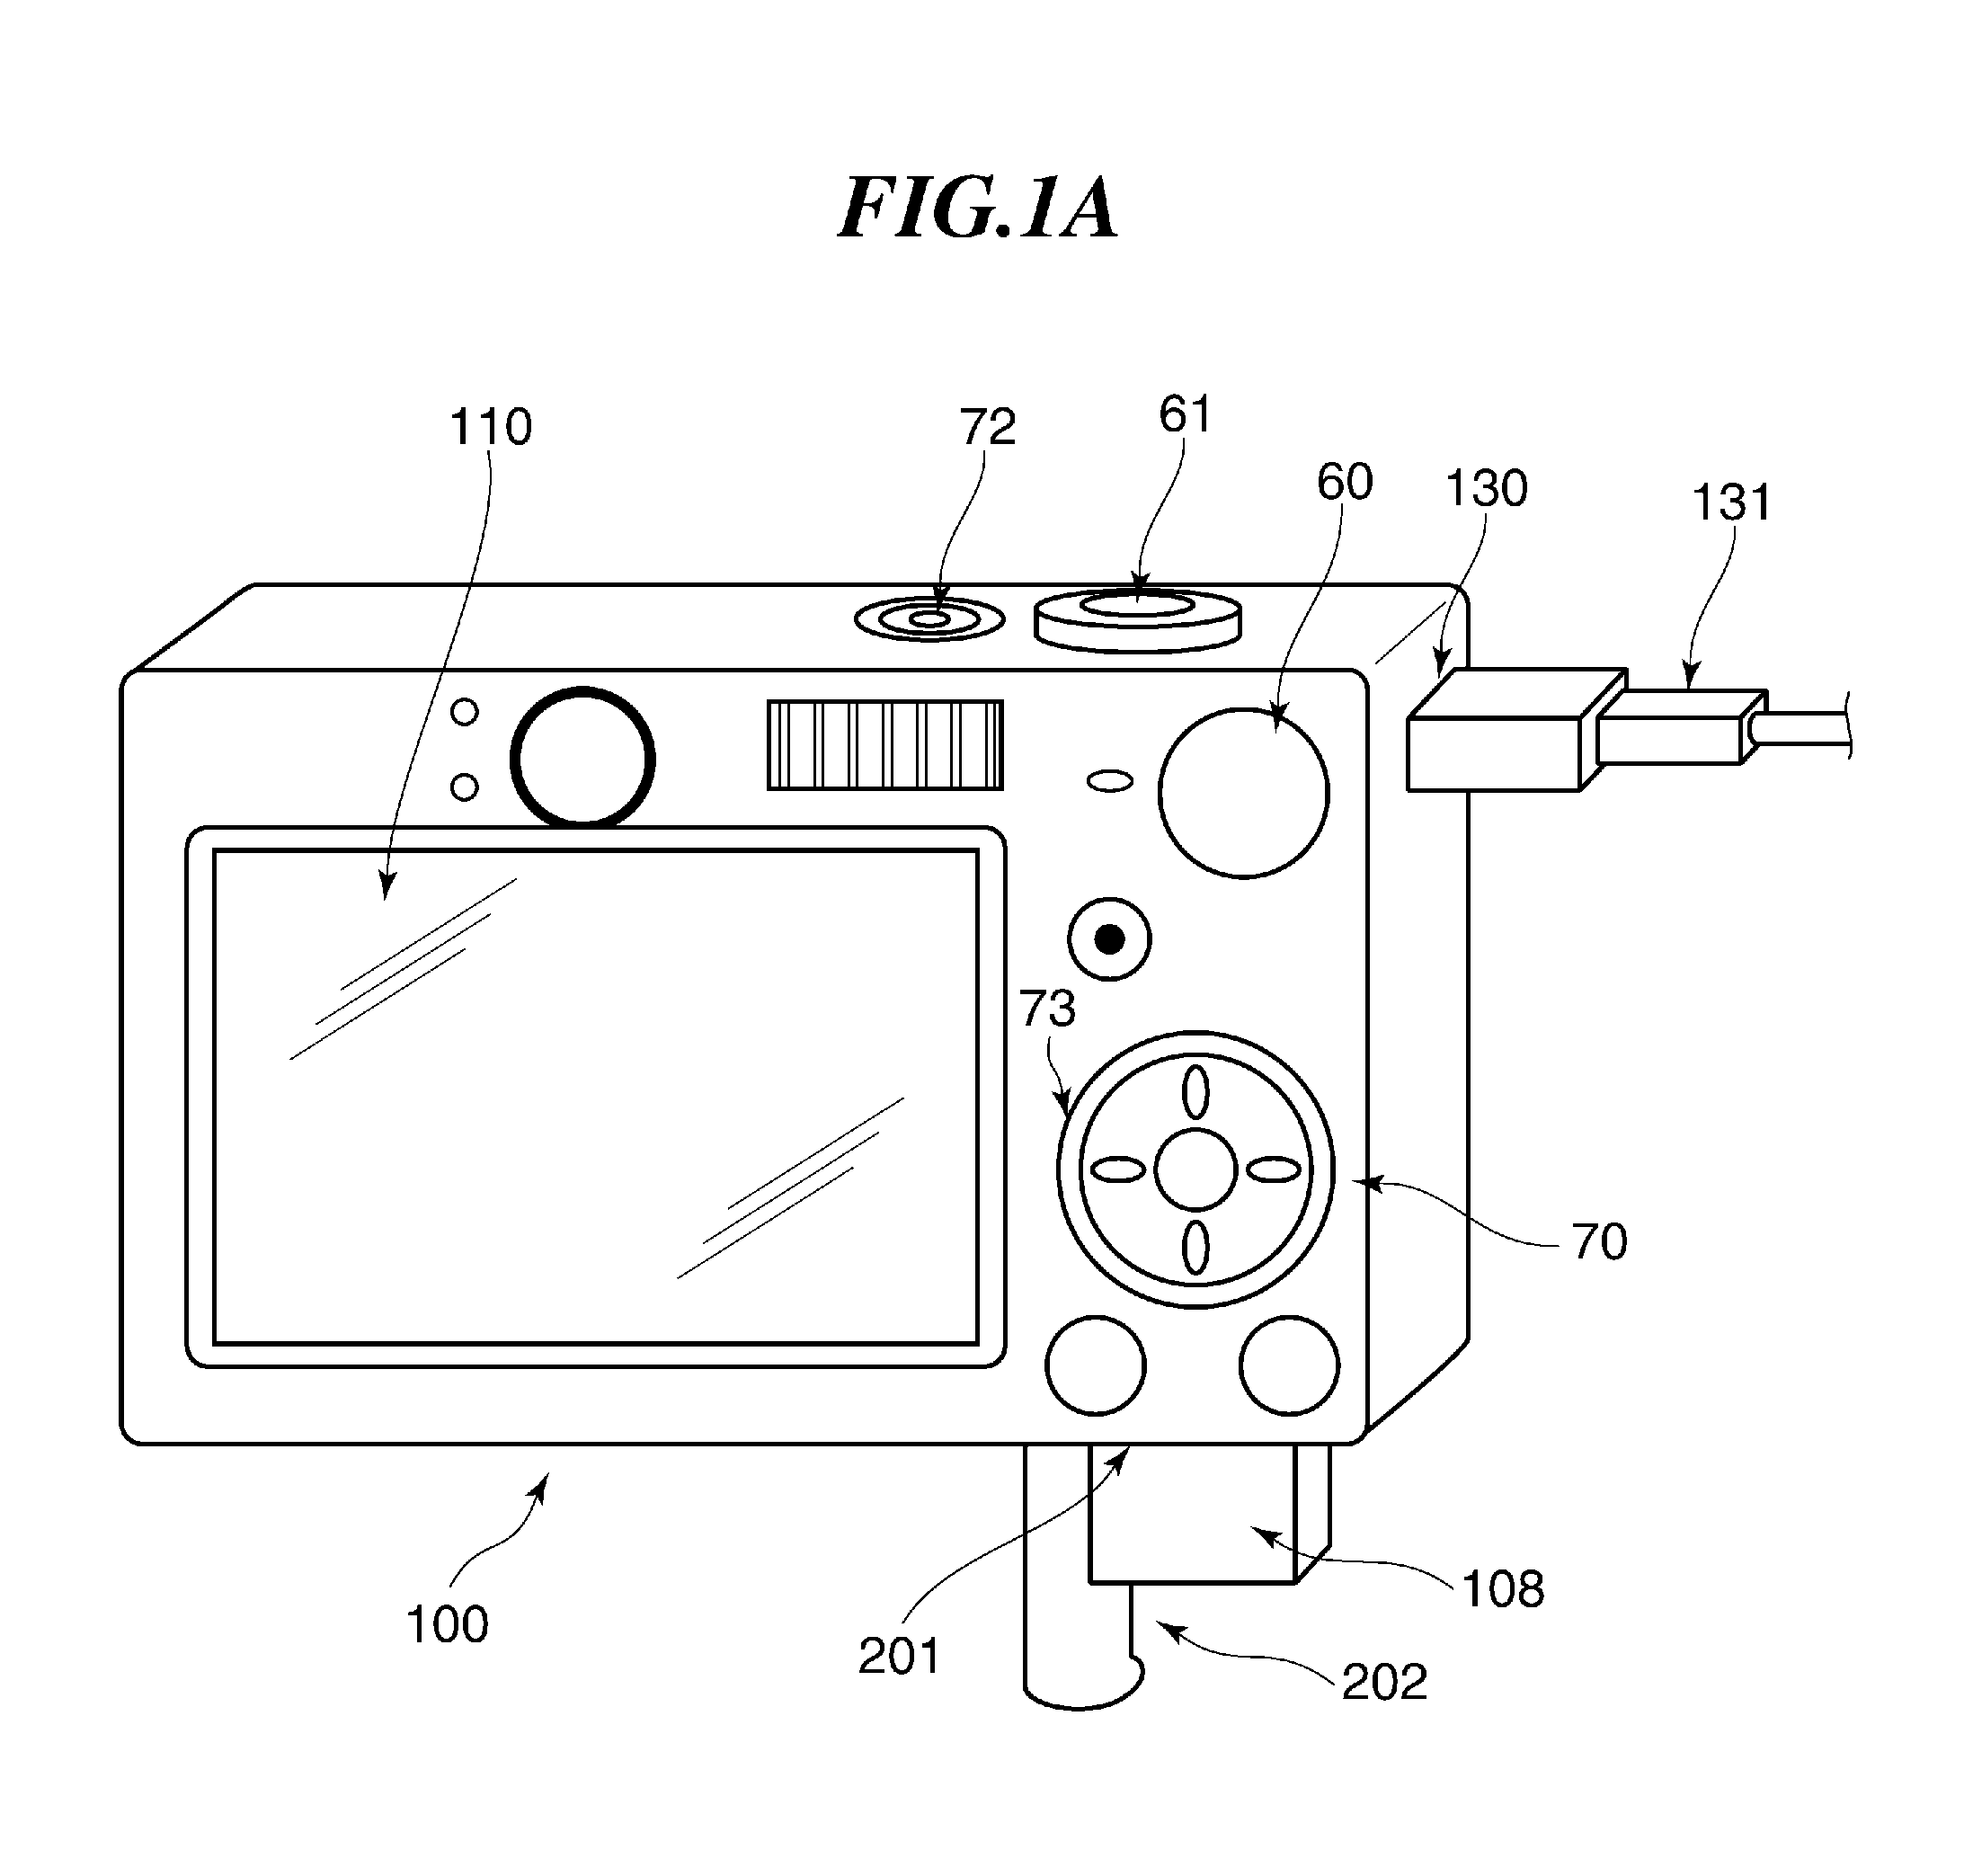 Display control apparatus that displays list of images onto display unit, display control method, and storage medium storing control program therefor